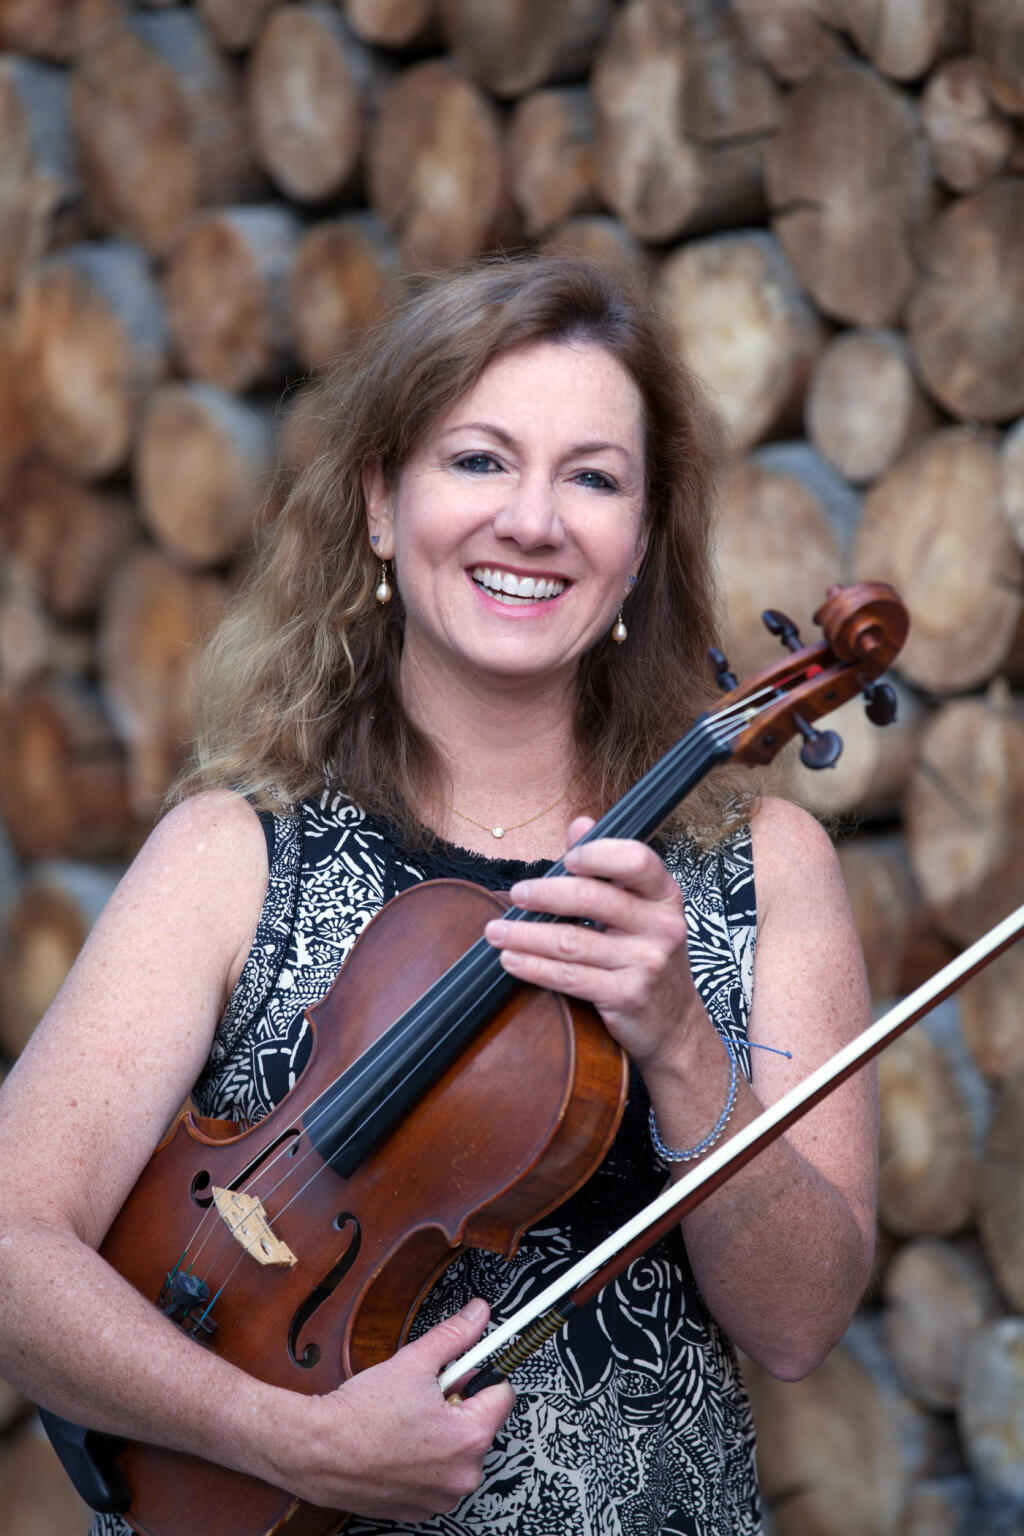 As this season’s artistic partner for the Santa Rosa Symphony, Elizabeth Prior will be featured during this weekend’s concerts as the soloist in Ralph Vaughan Williams’ “Flos Campi (Flower of the Field)”: Suite for Viola, Orchestra and Chorus. (Caroline Woodham)